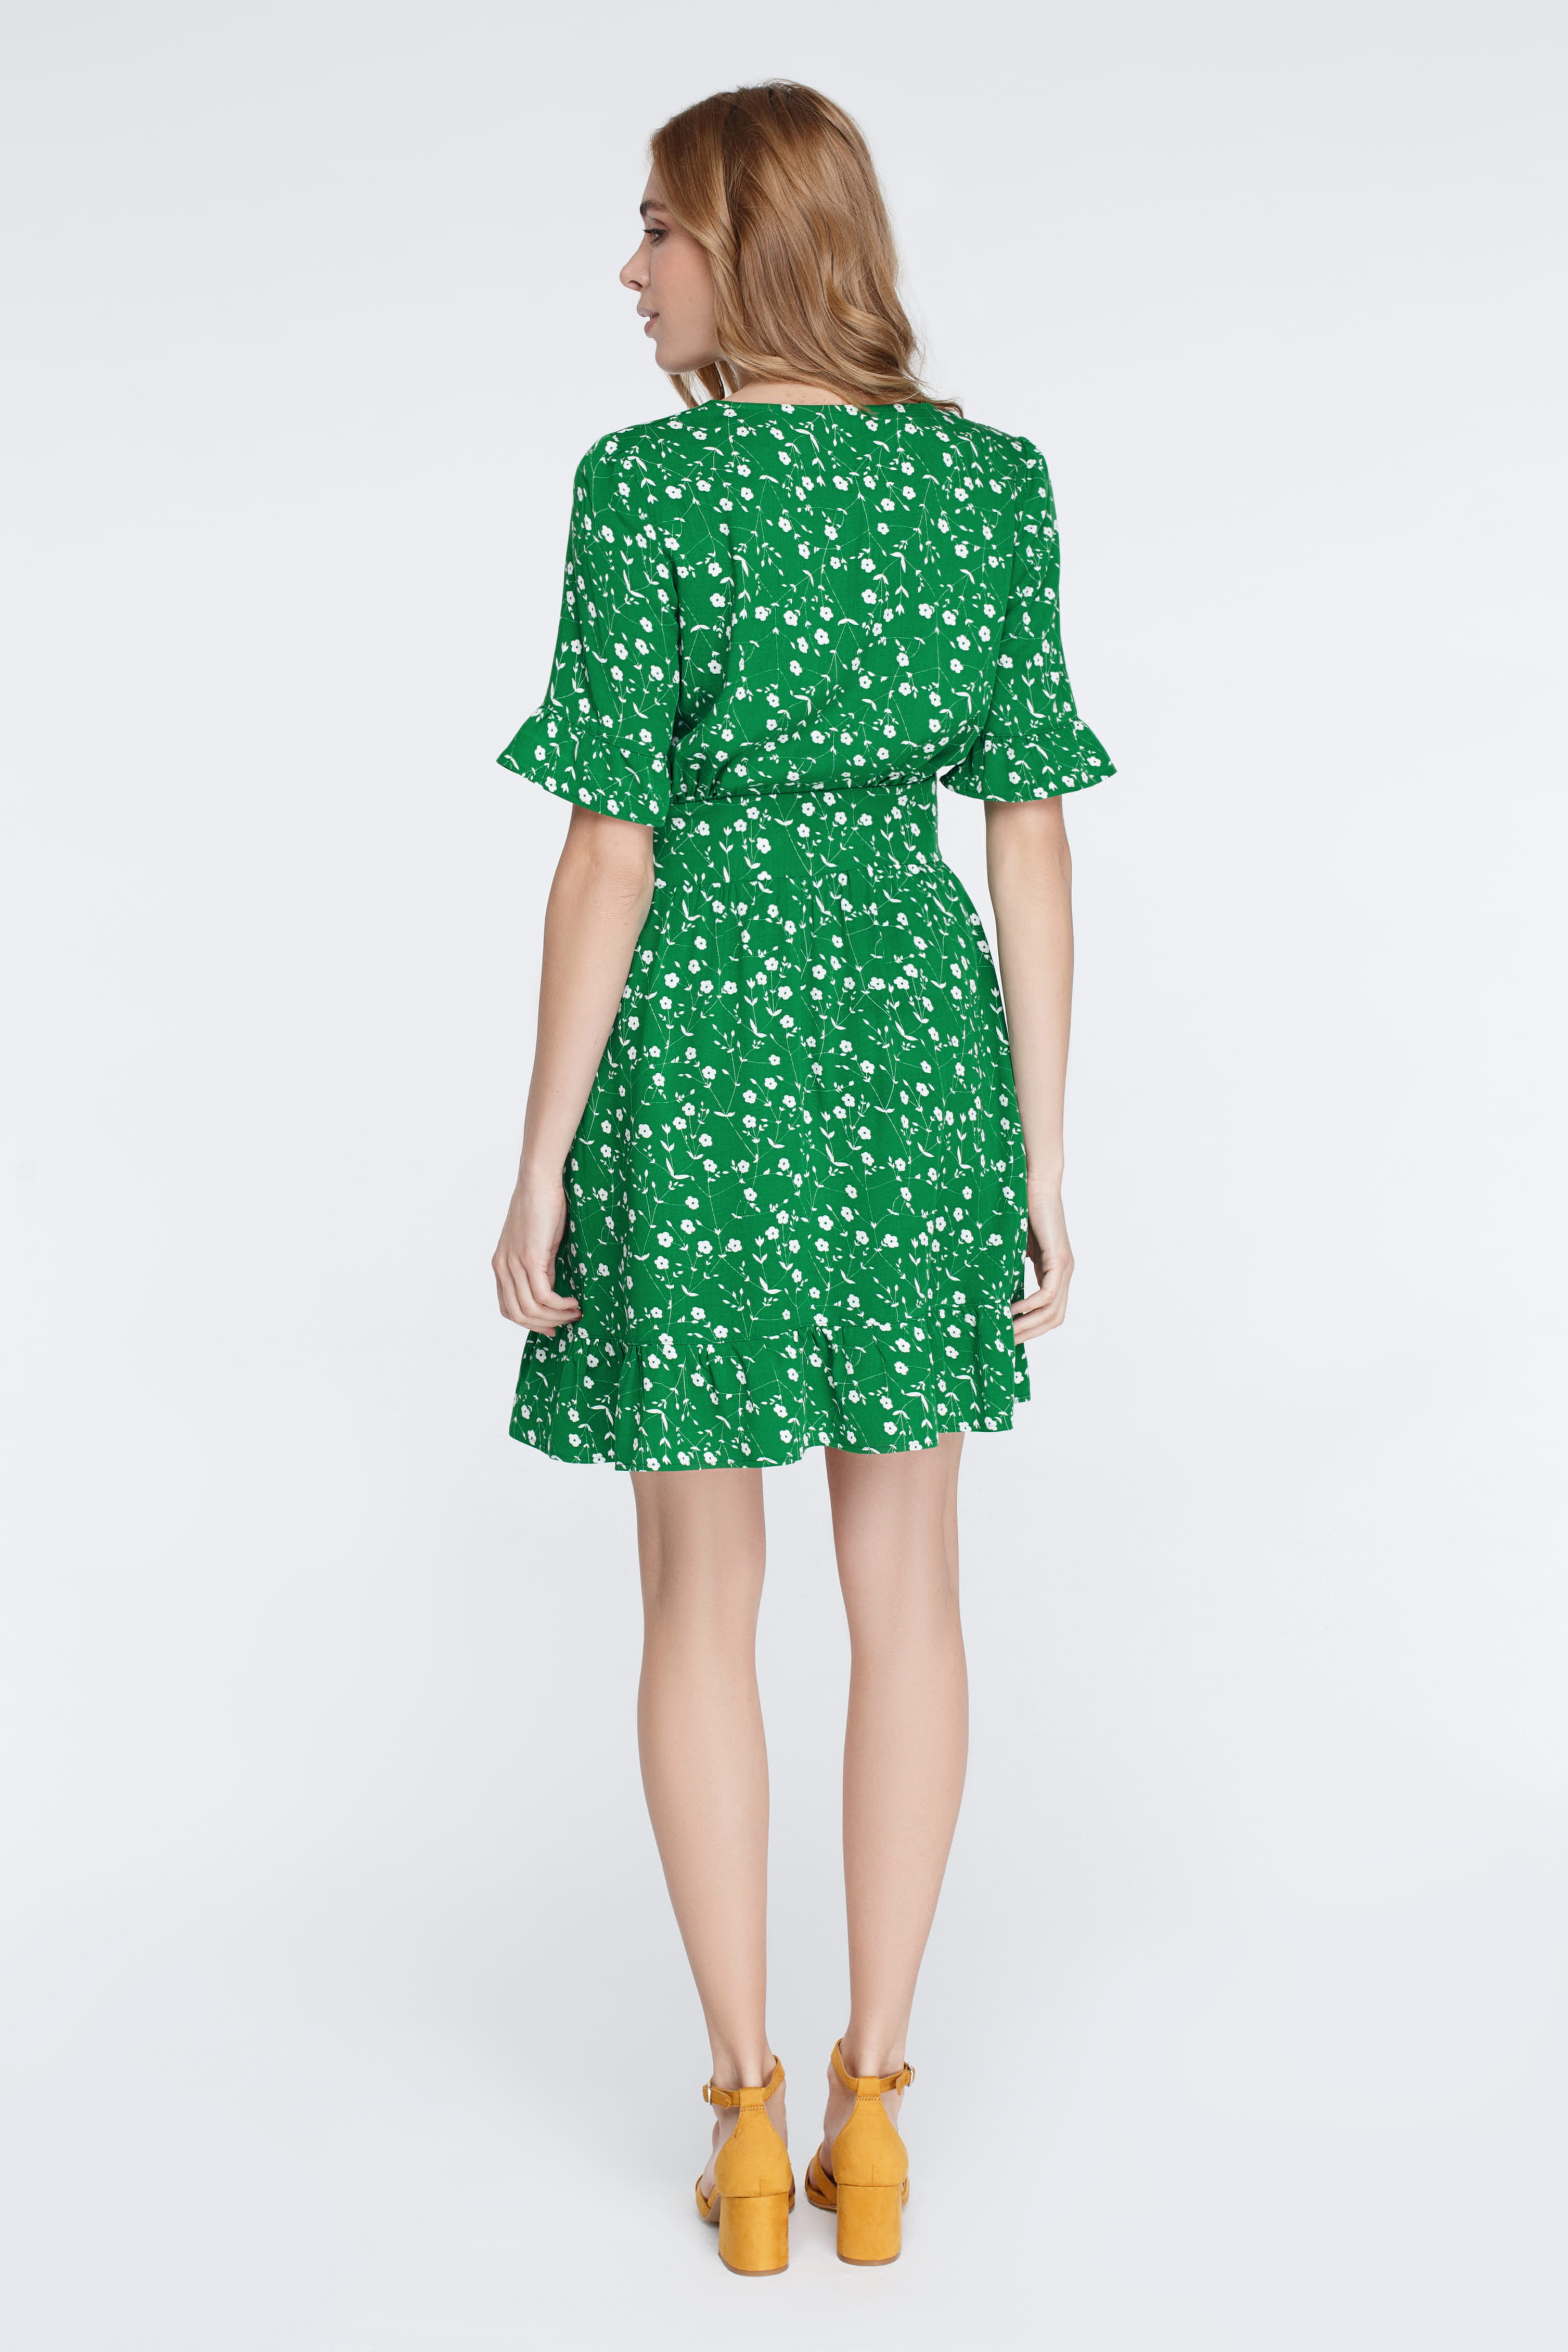 Green mini dress in floral print with frill, photo 5